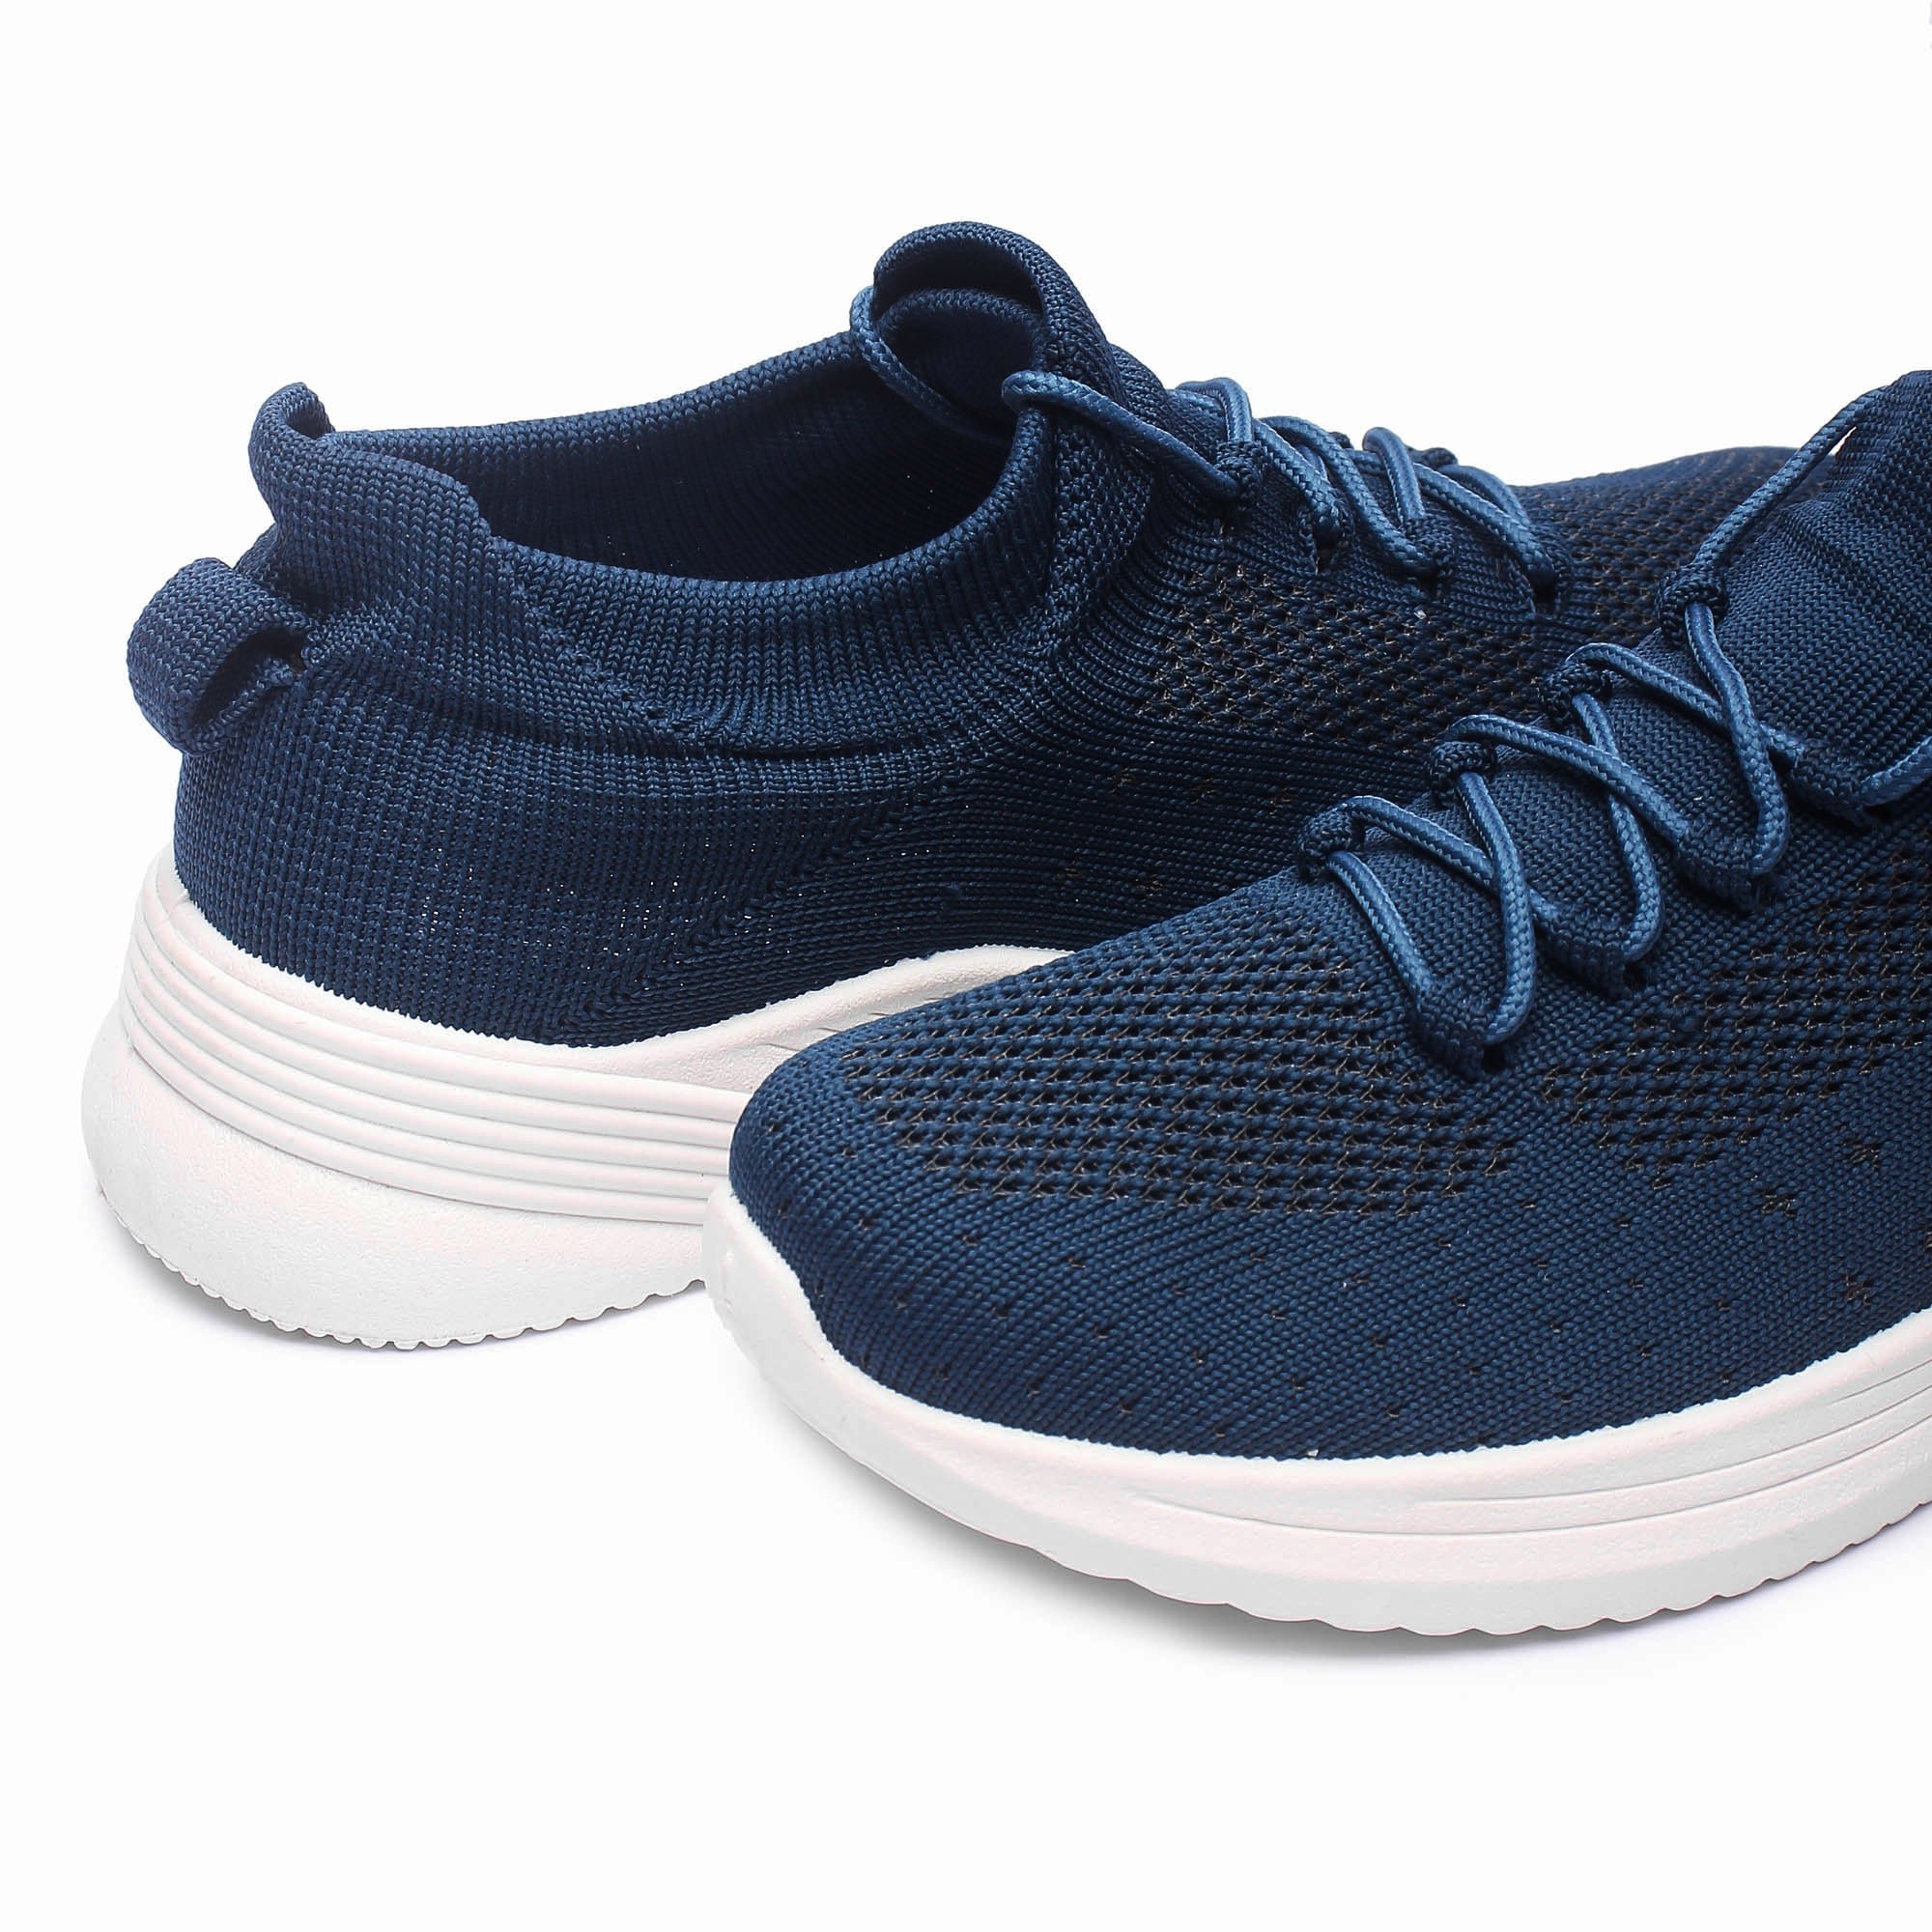 FUEL Trenzo Navy Girls Sneakers for Walking/Running | Comfortable, Lightweight & Breathable, Dailywear | Girls Stylish Footwear & Orthotic Technology